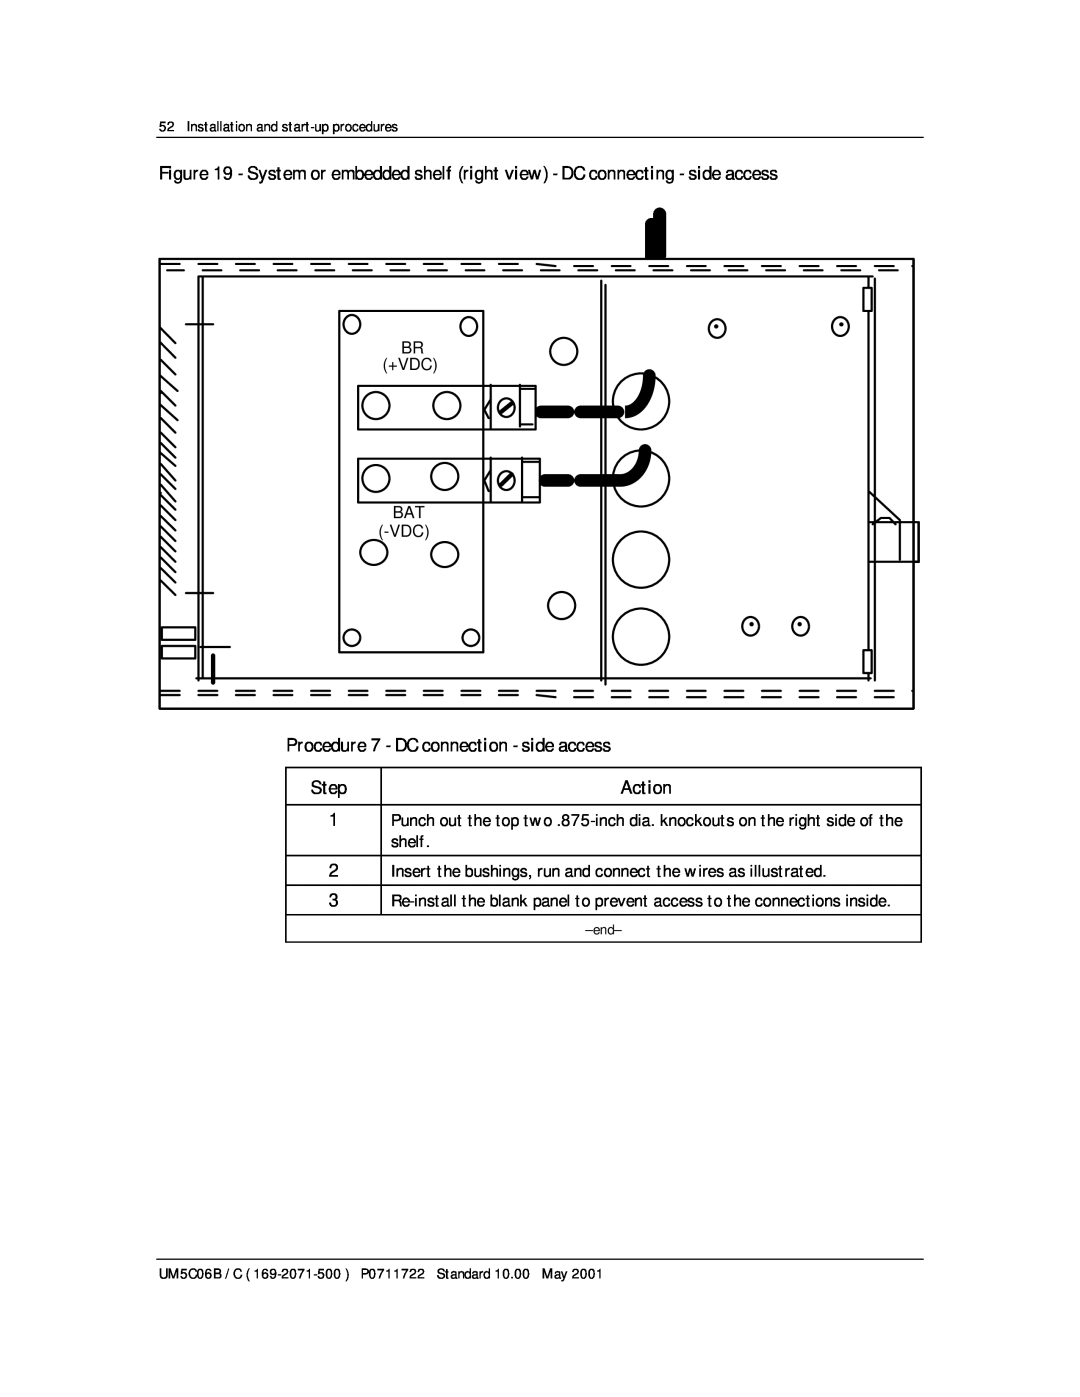 Emerson MPR15 Series, MPR25 user manual Procedure 7 - DC connection - side access, Step 